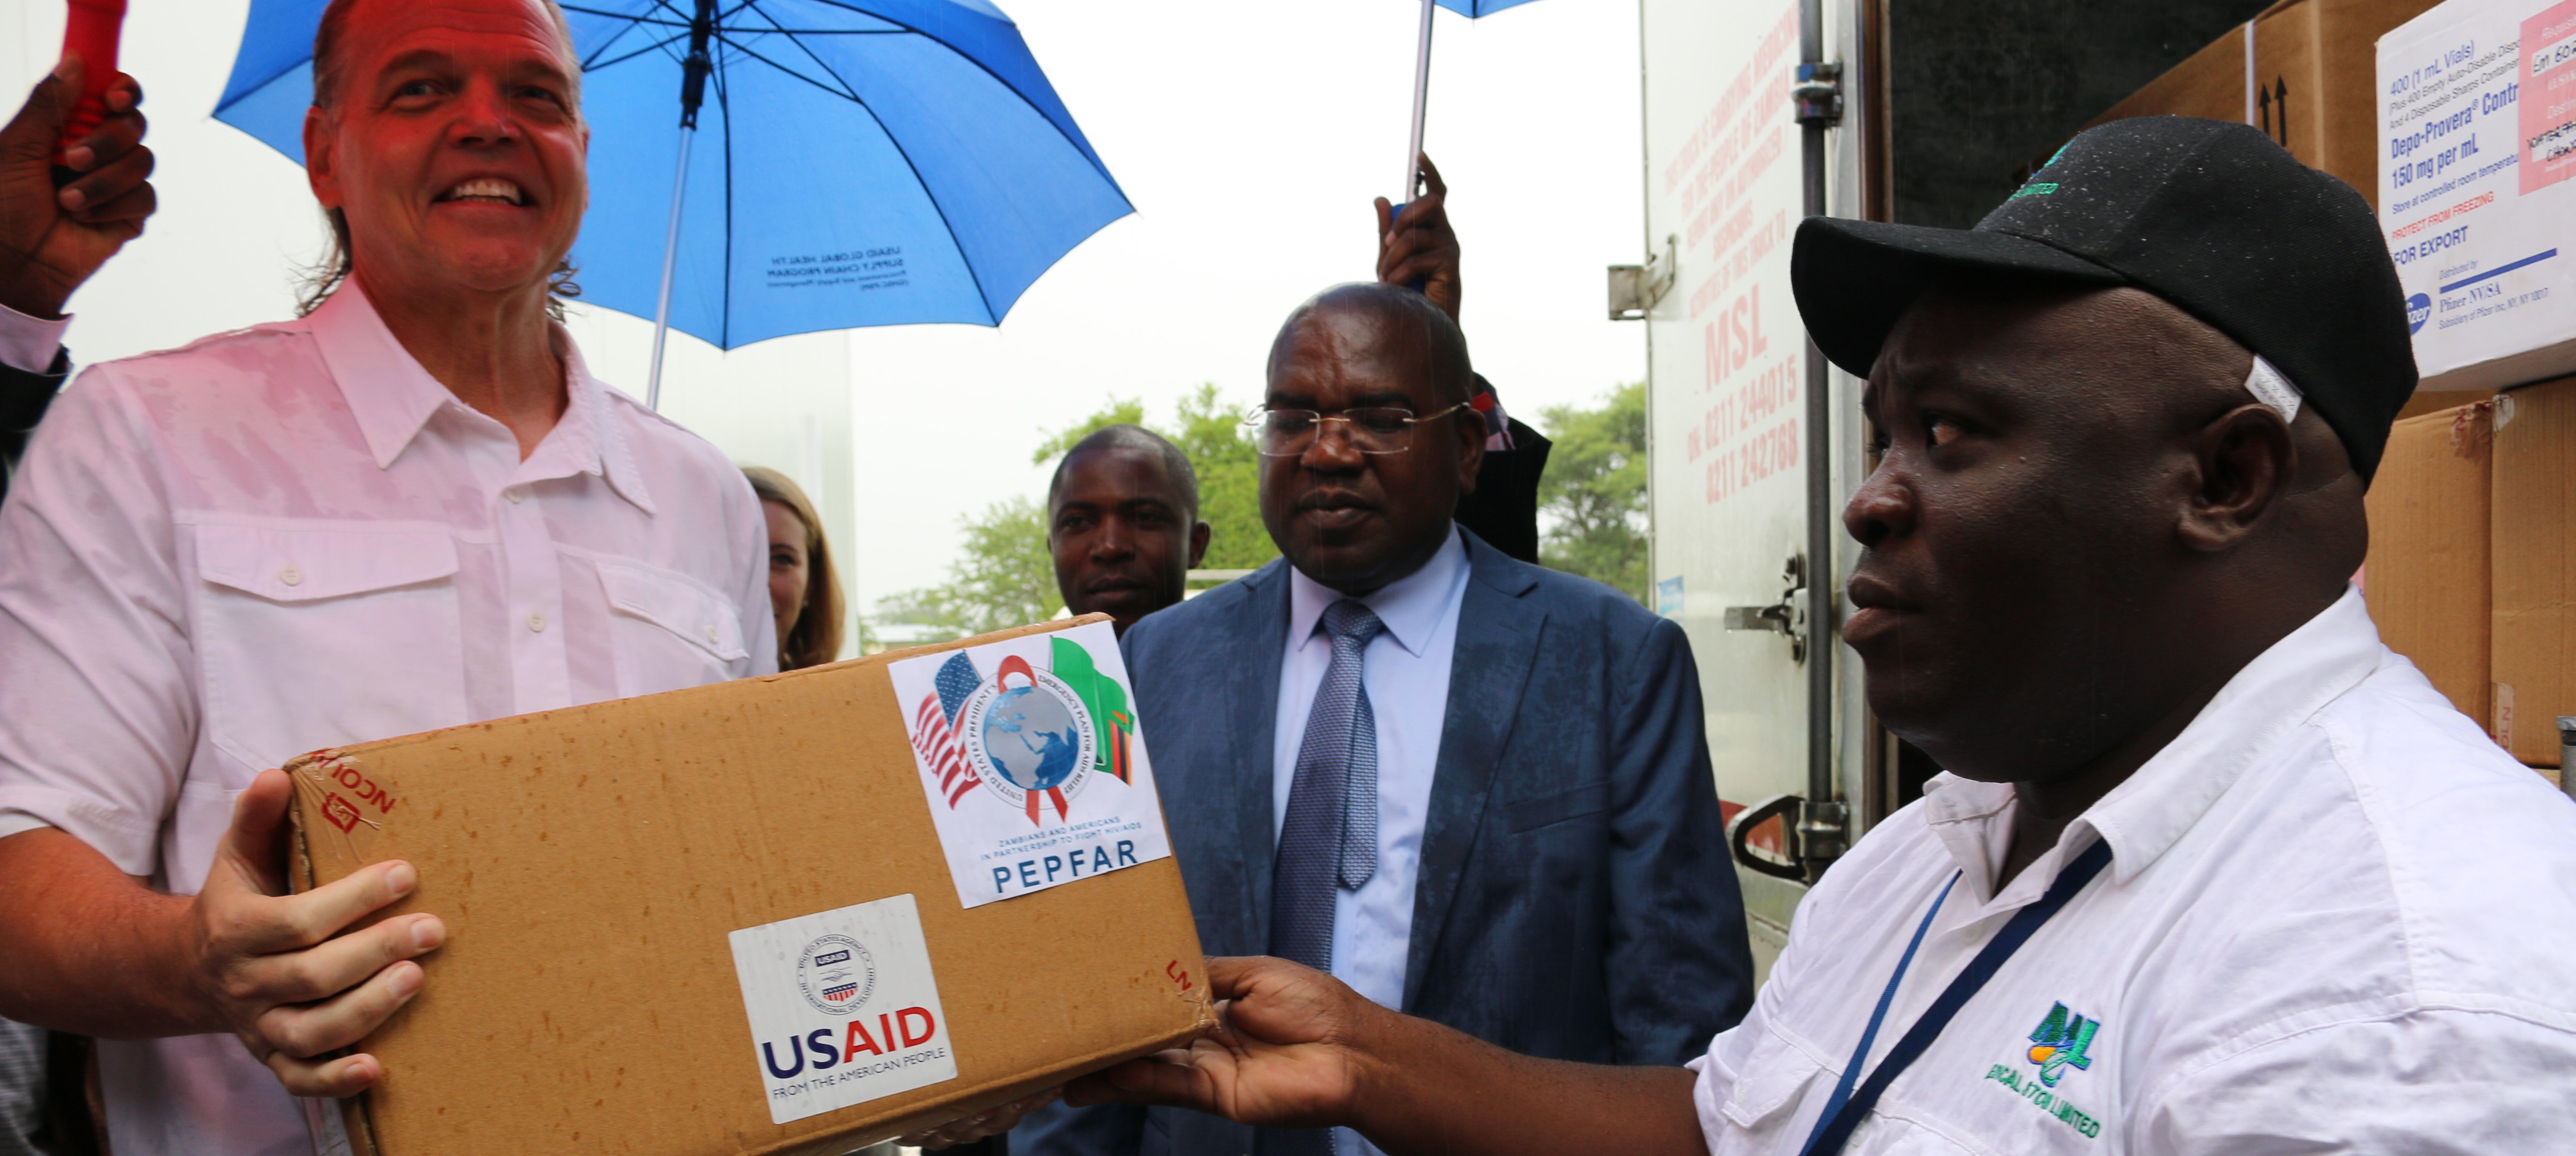 Ambassador Daniel Foote offloads a box of health commodities to be moved into a pre-fabricated storage unit as Zambian Minister of Health Chilufya and MSL Managing Director Chikuta Mbewe look on.